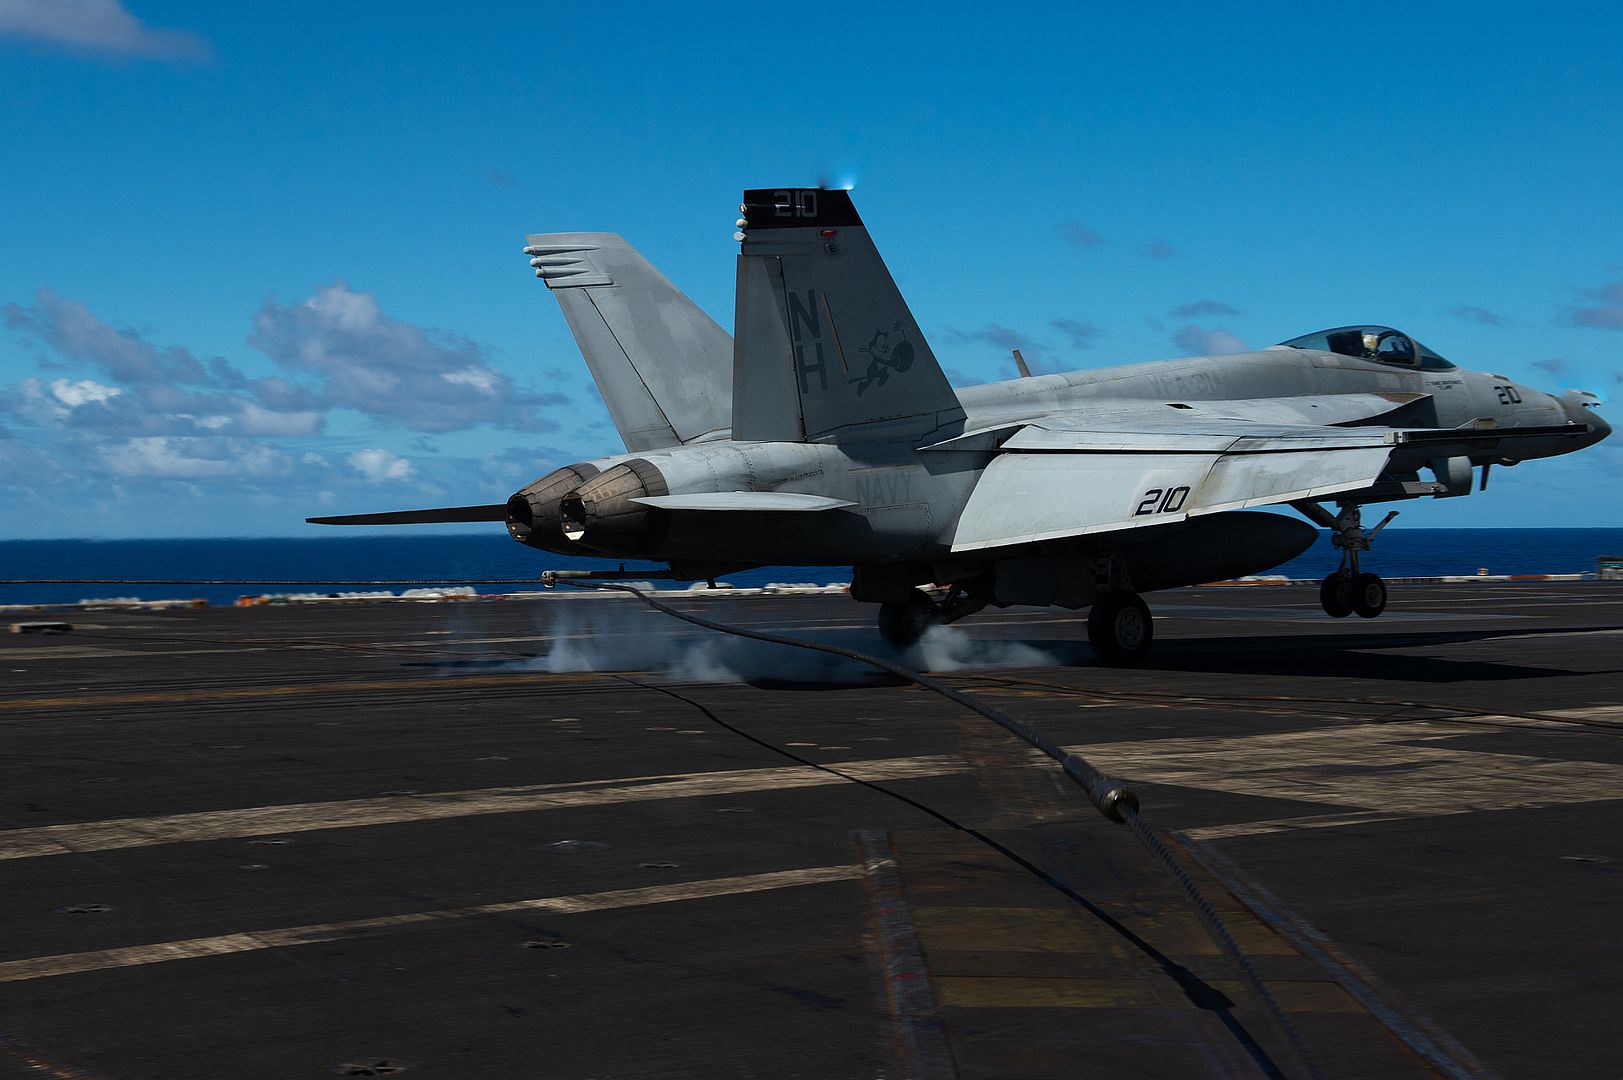  Makes An Arrested Landing On The Flight Deck Of The Aircraft Carrier USS Theodore Roosevelt